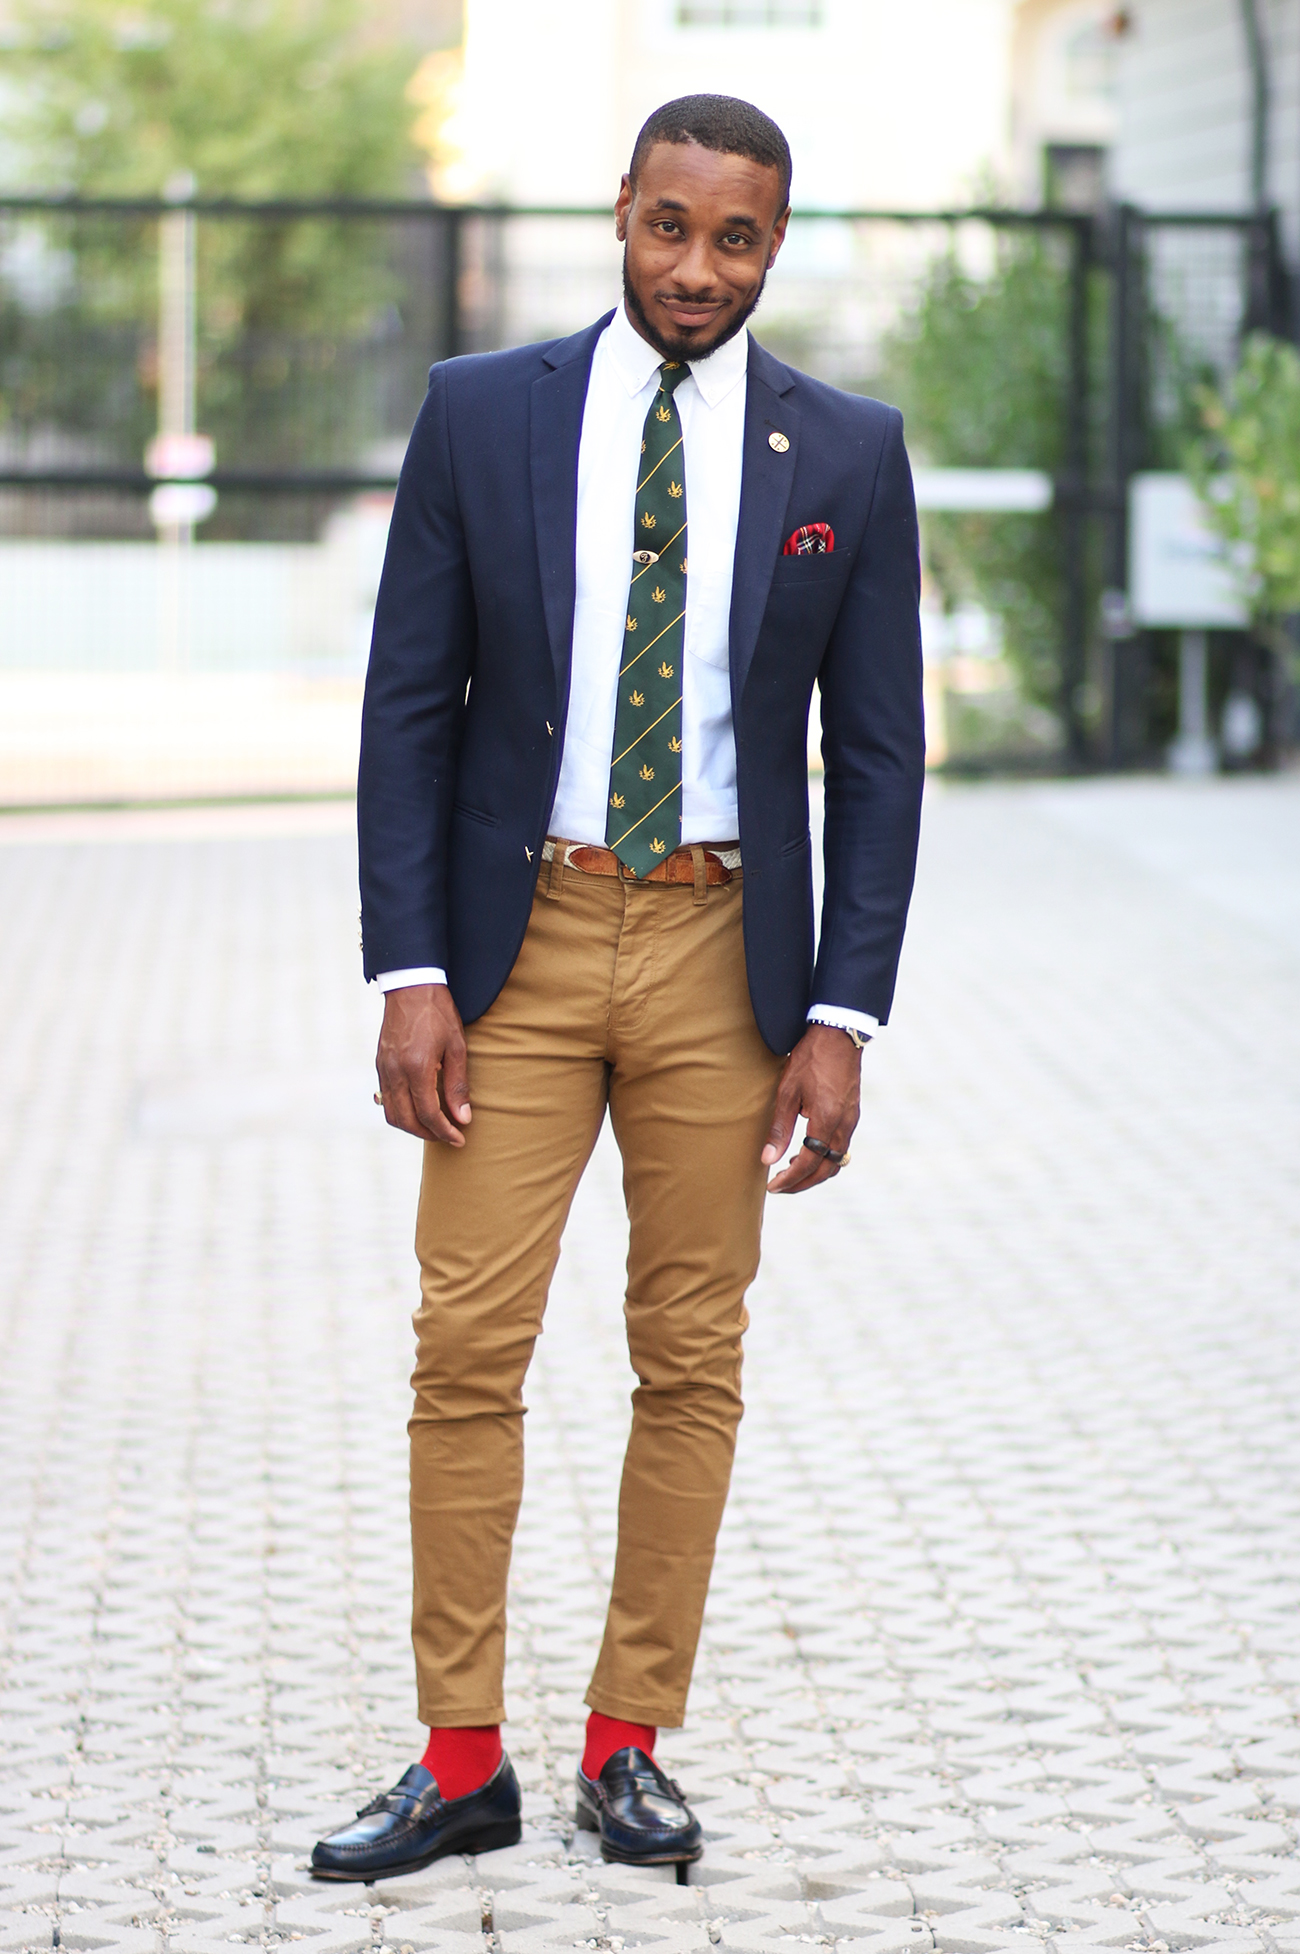 STYLE UNIFORMS FOR BACK-TO-SCHOOL – Norris Danta Ford